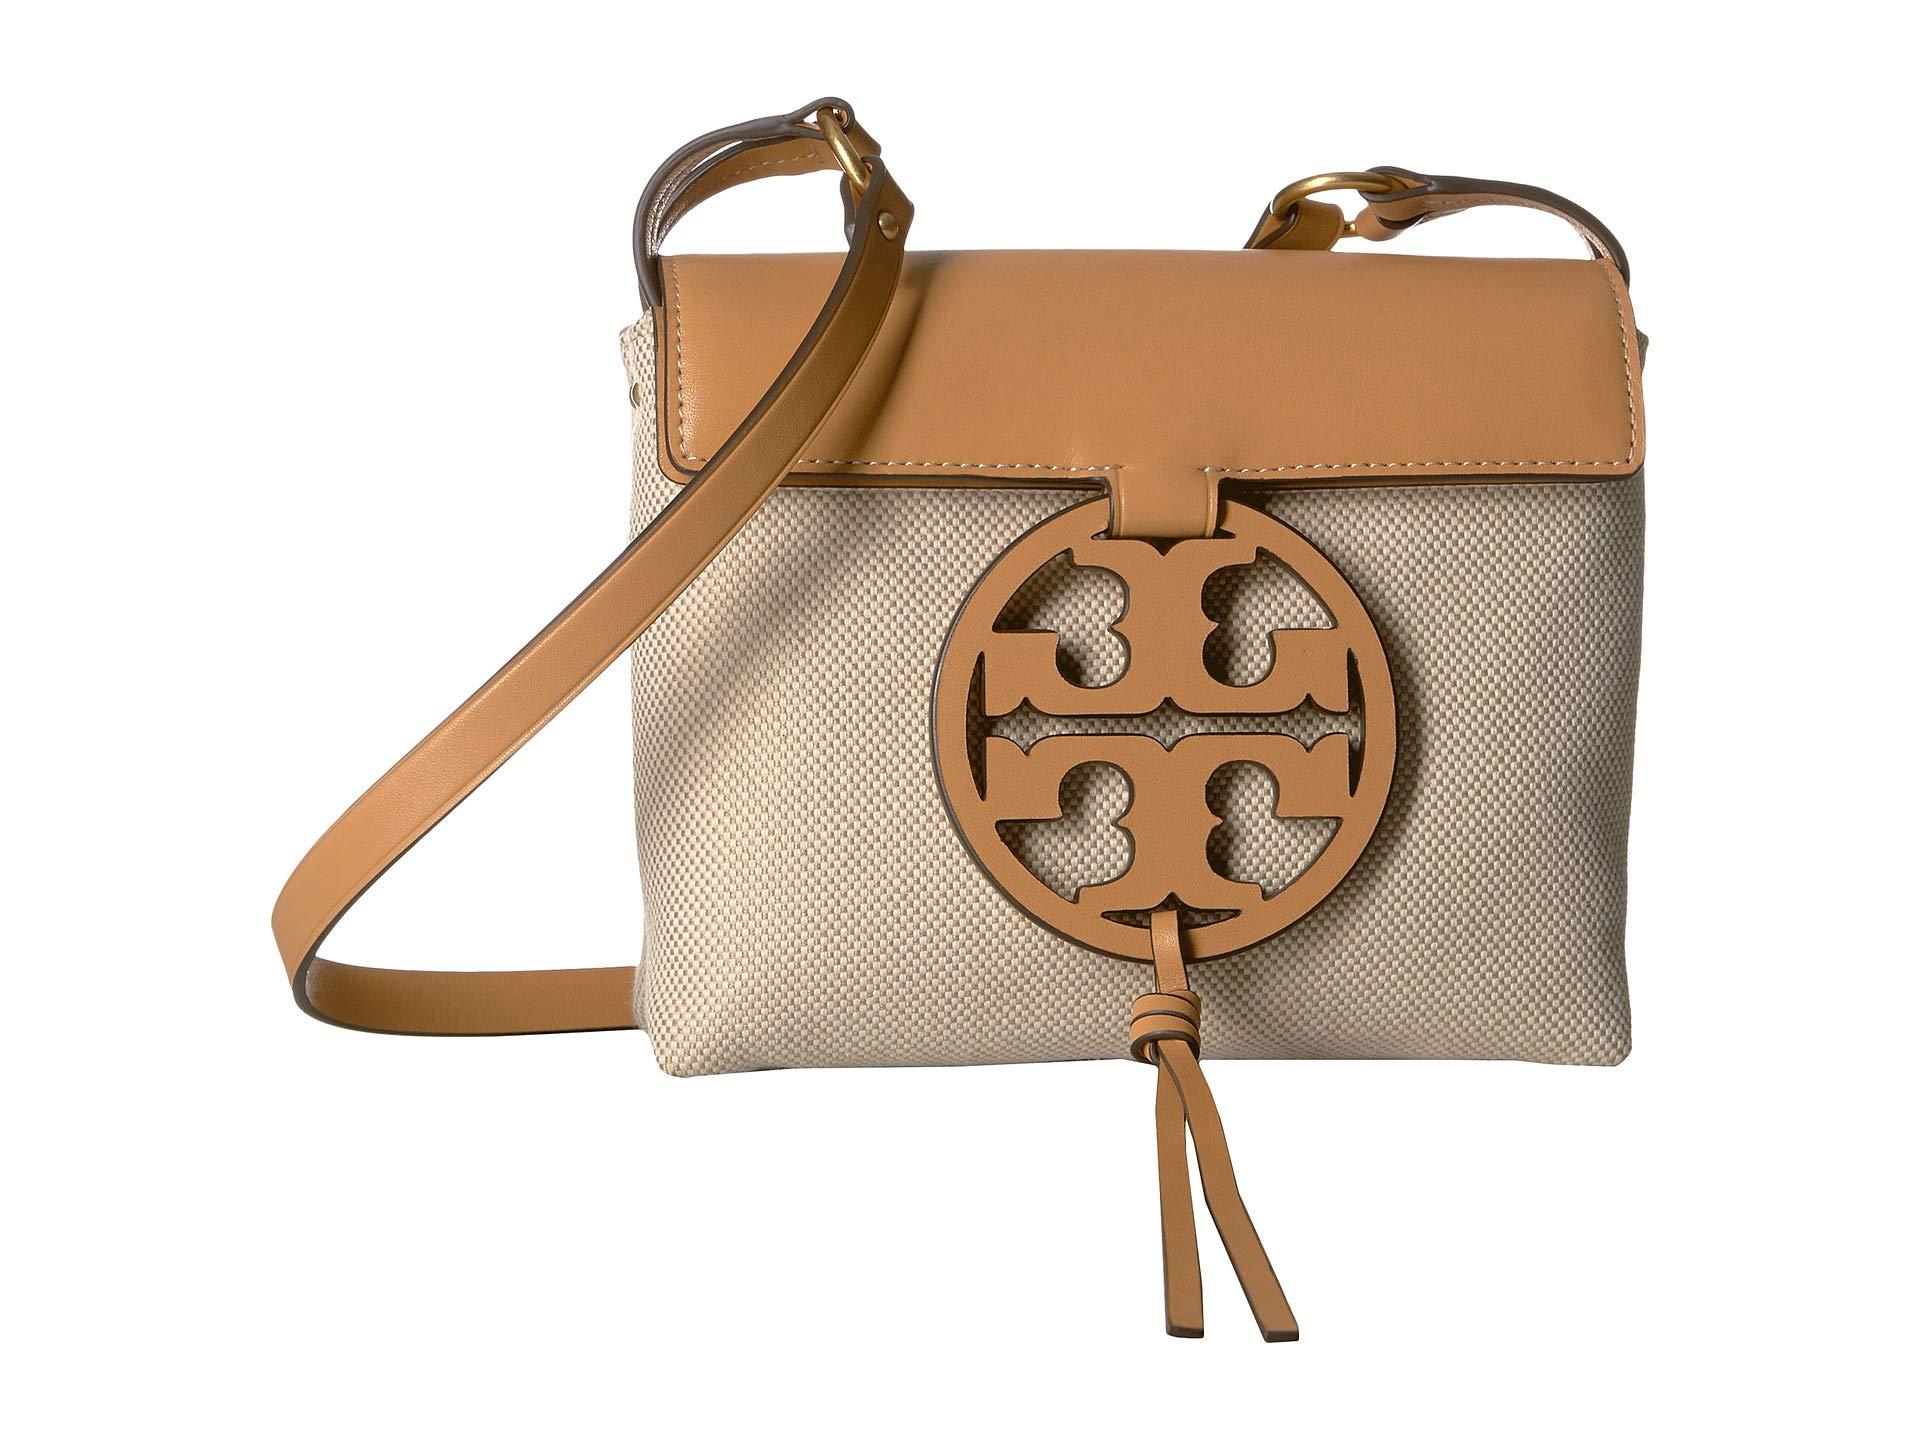 Tory Burch Miller Canvas Crossbody in Beige (Natural) - Lyst